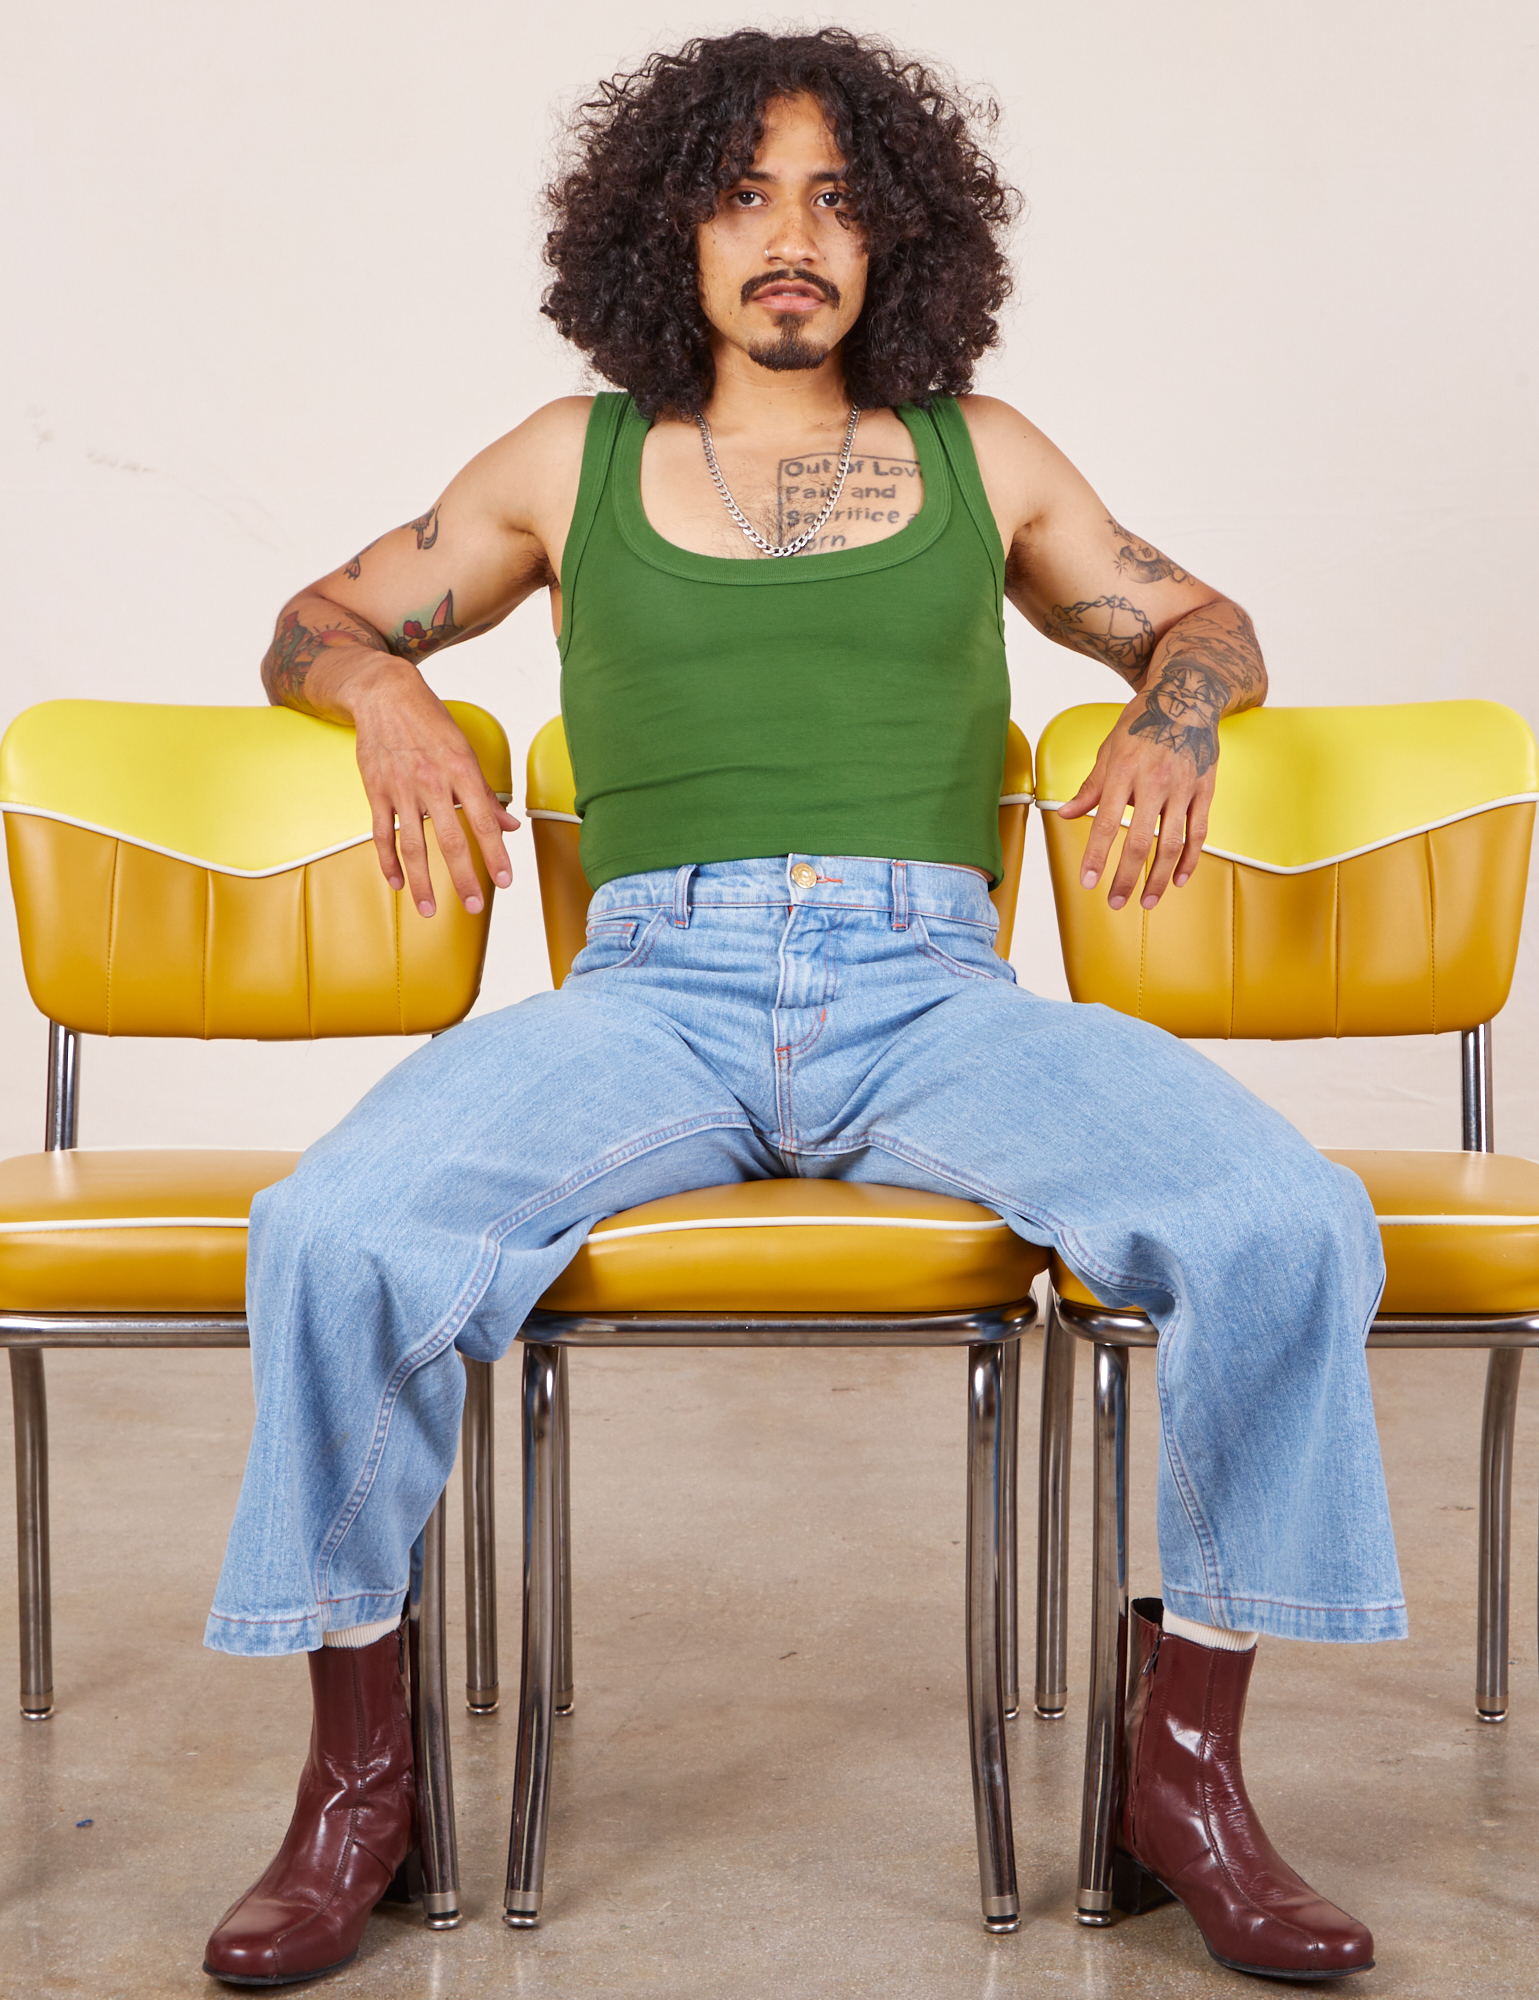 Jesse is wearing Cropped Tank Top in Lawn Green and light wash Sailor Jeans. They are sitting on a yellow chair.